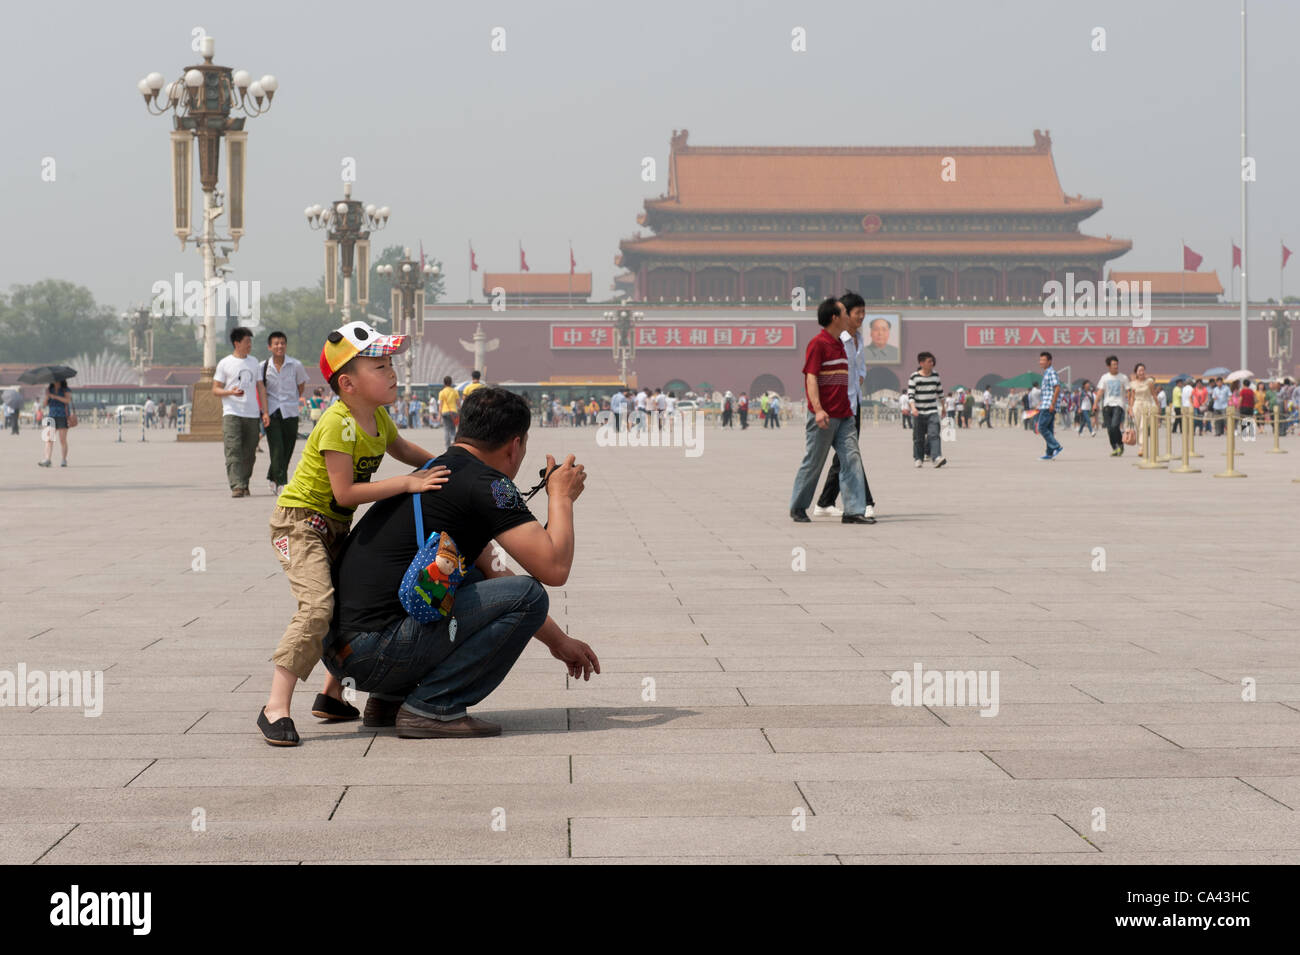 Father and son visiting Tiananmen Square, Beijing, China on Monday June 4, 2012. June 4th 2012 marks the 23rd anniversary of the military crackdown on students protests at Tiananmen Square in 1989. Stock Photo